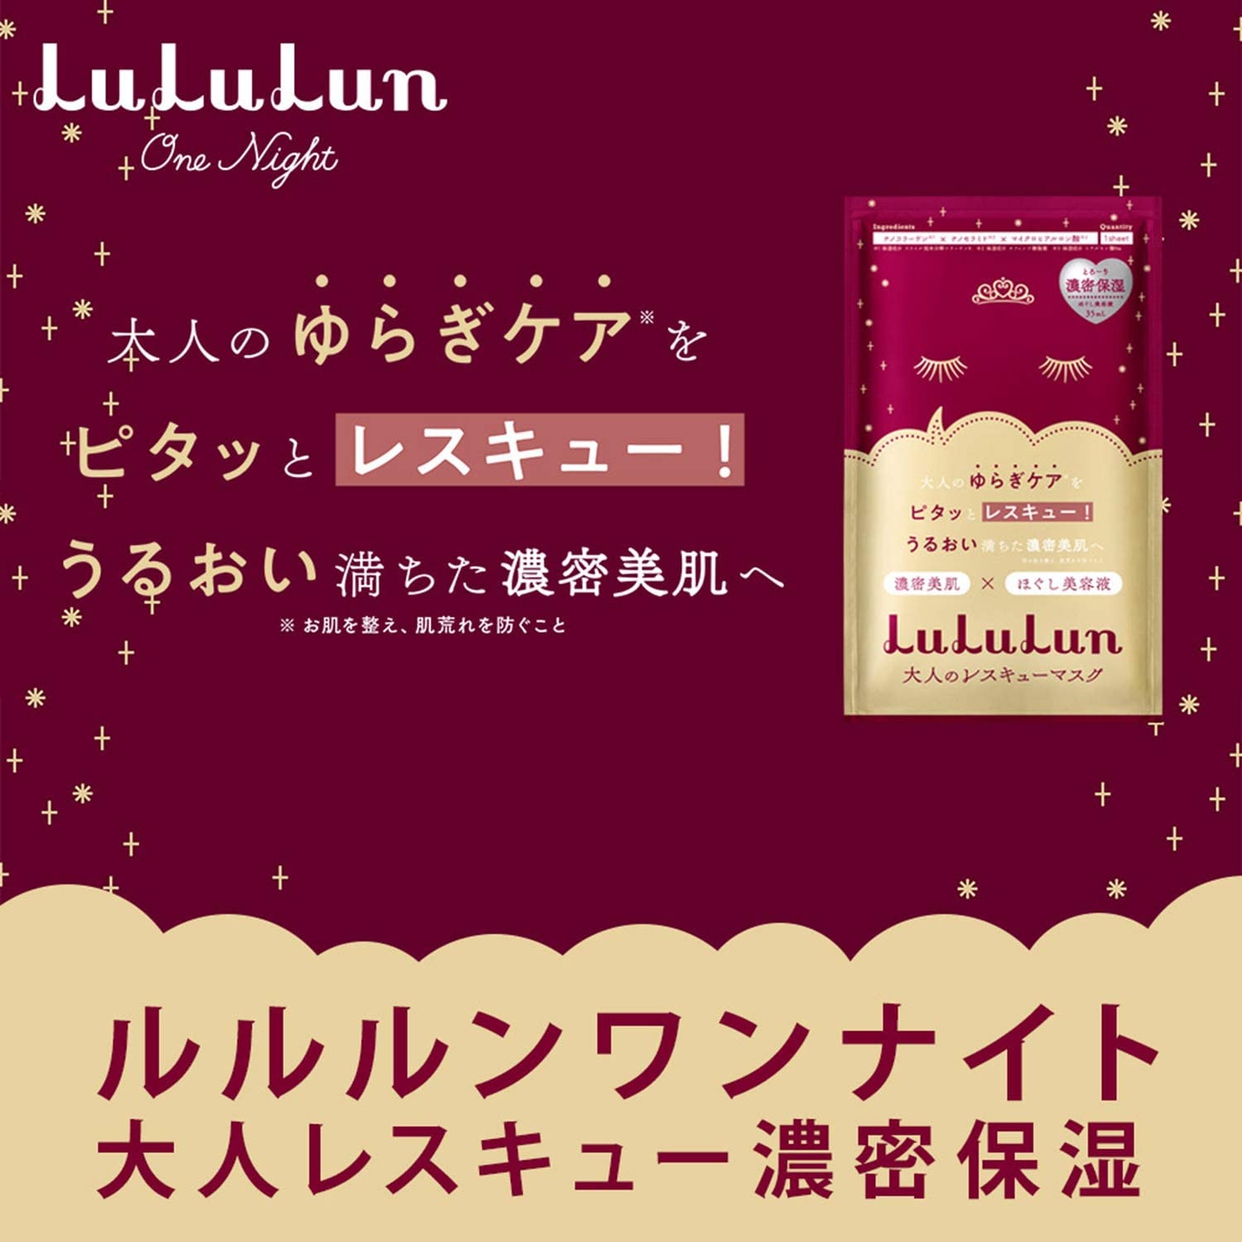 LuLuLun(ルルルン) ワンナイト レスキュー 大人レスキュー 濃密保湿の商品画像サムネ2 